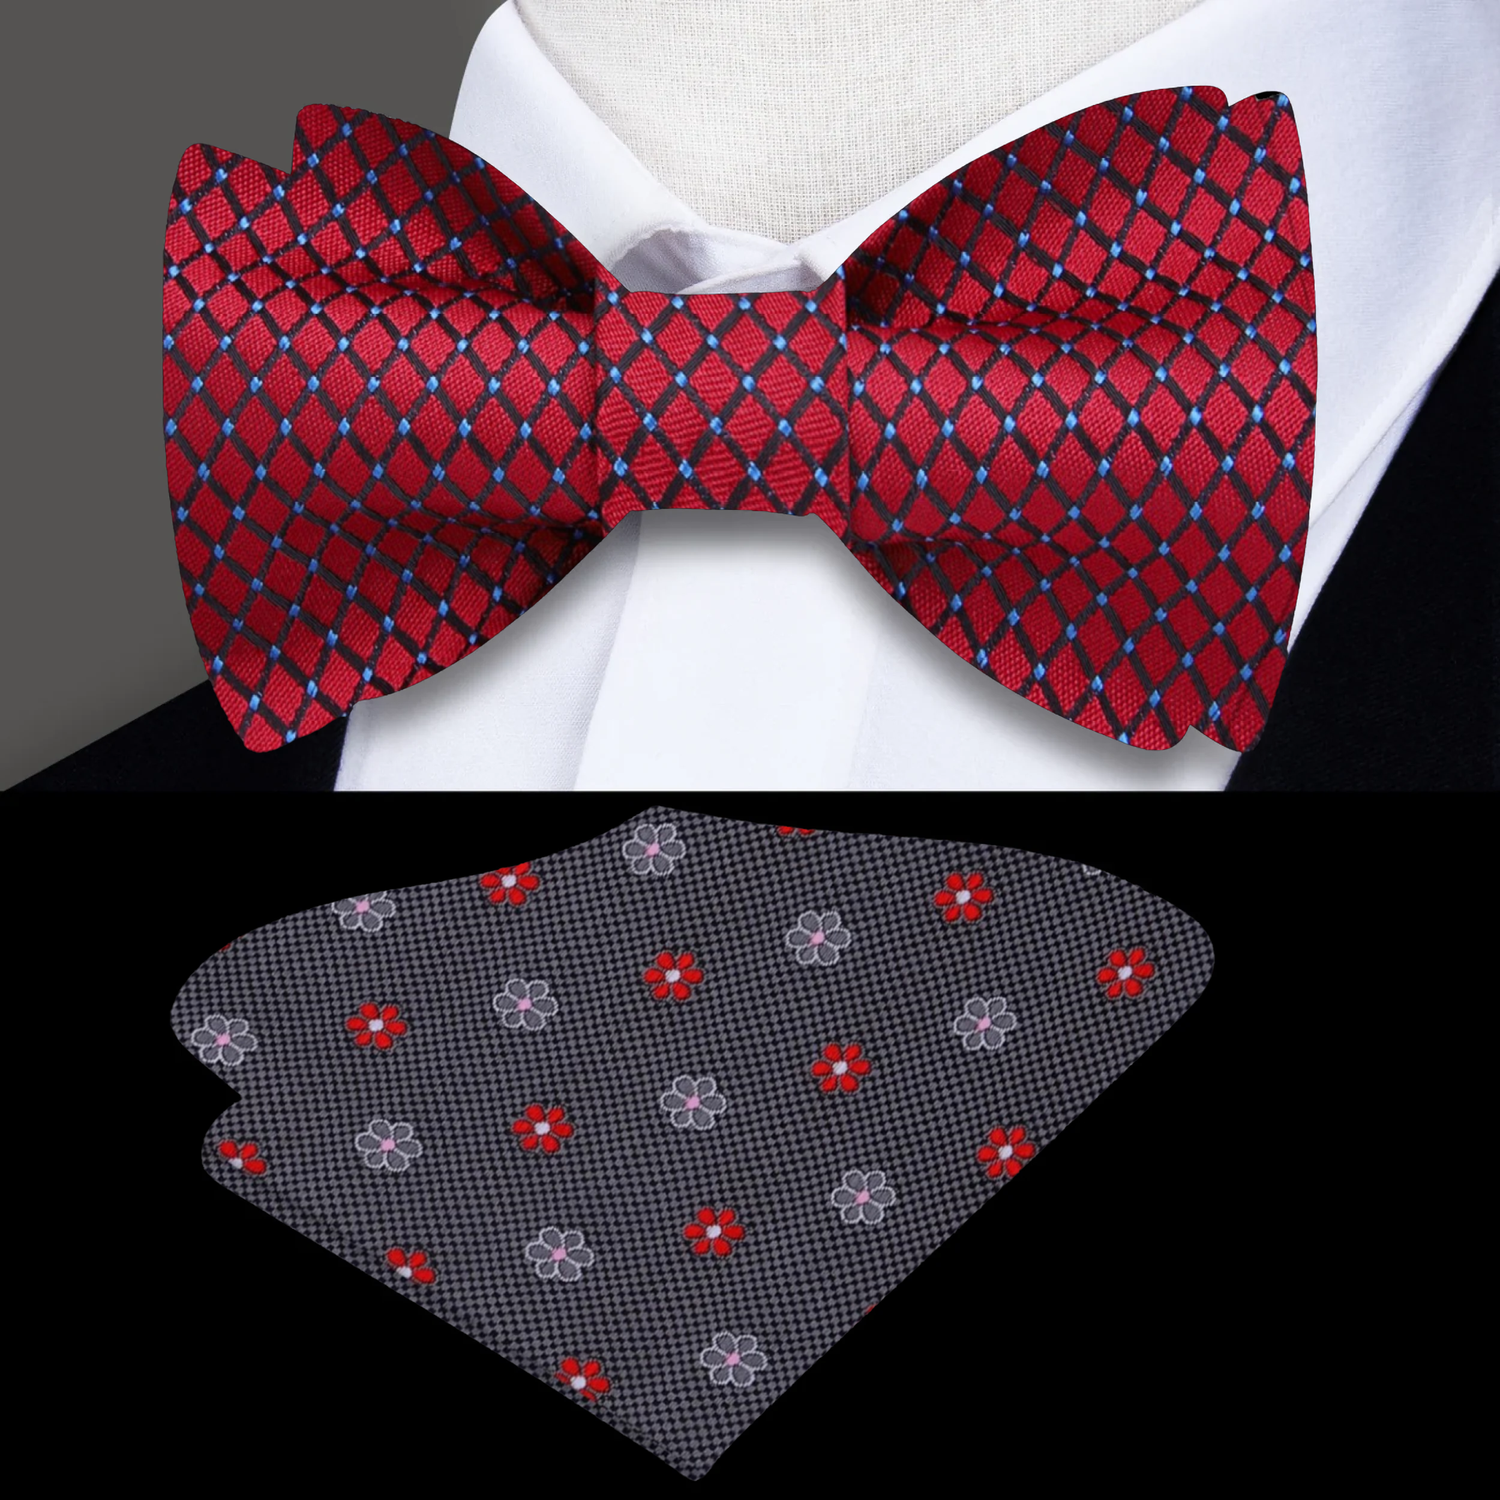 A Burgundy Small Geometric Diamond With Small Dots Pattern Silk Self Tie Bow Tie With Accenting Grey Floral Pocket Square